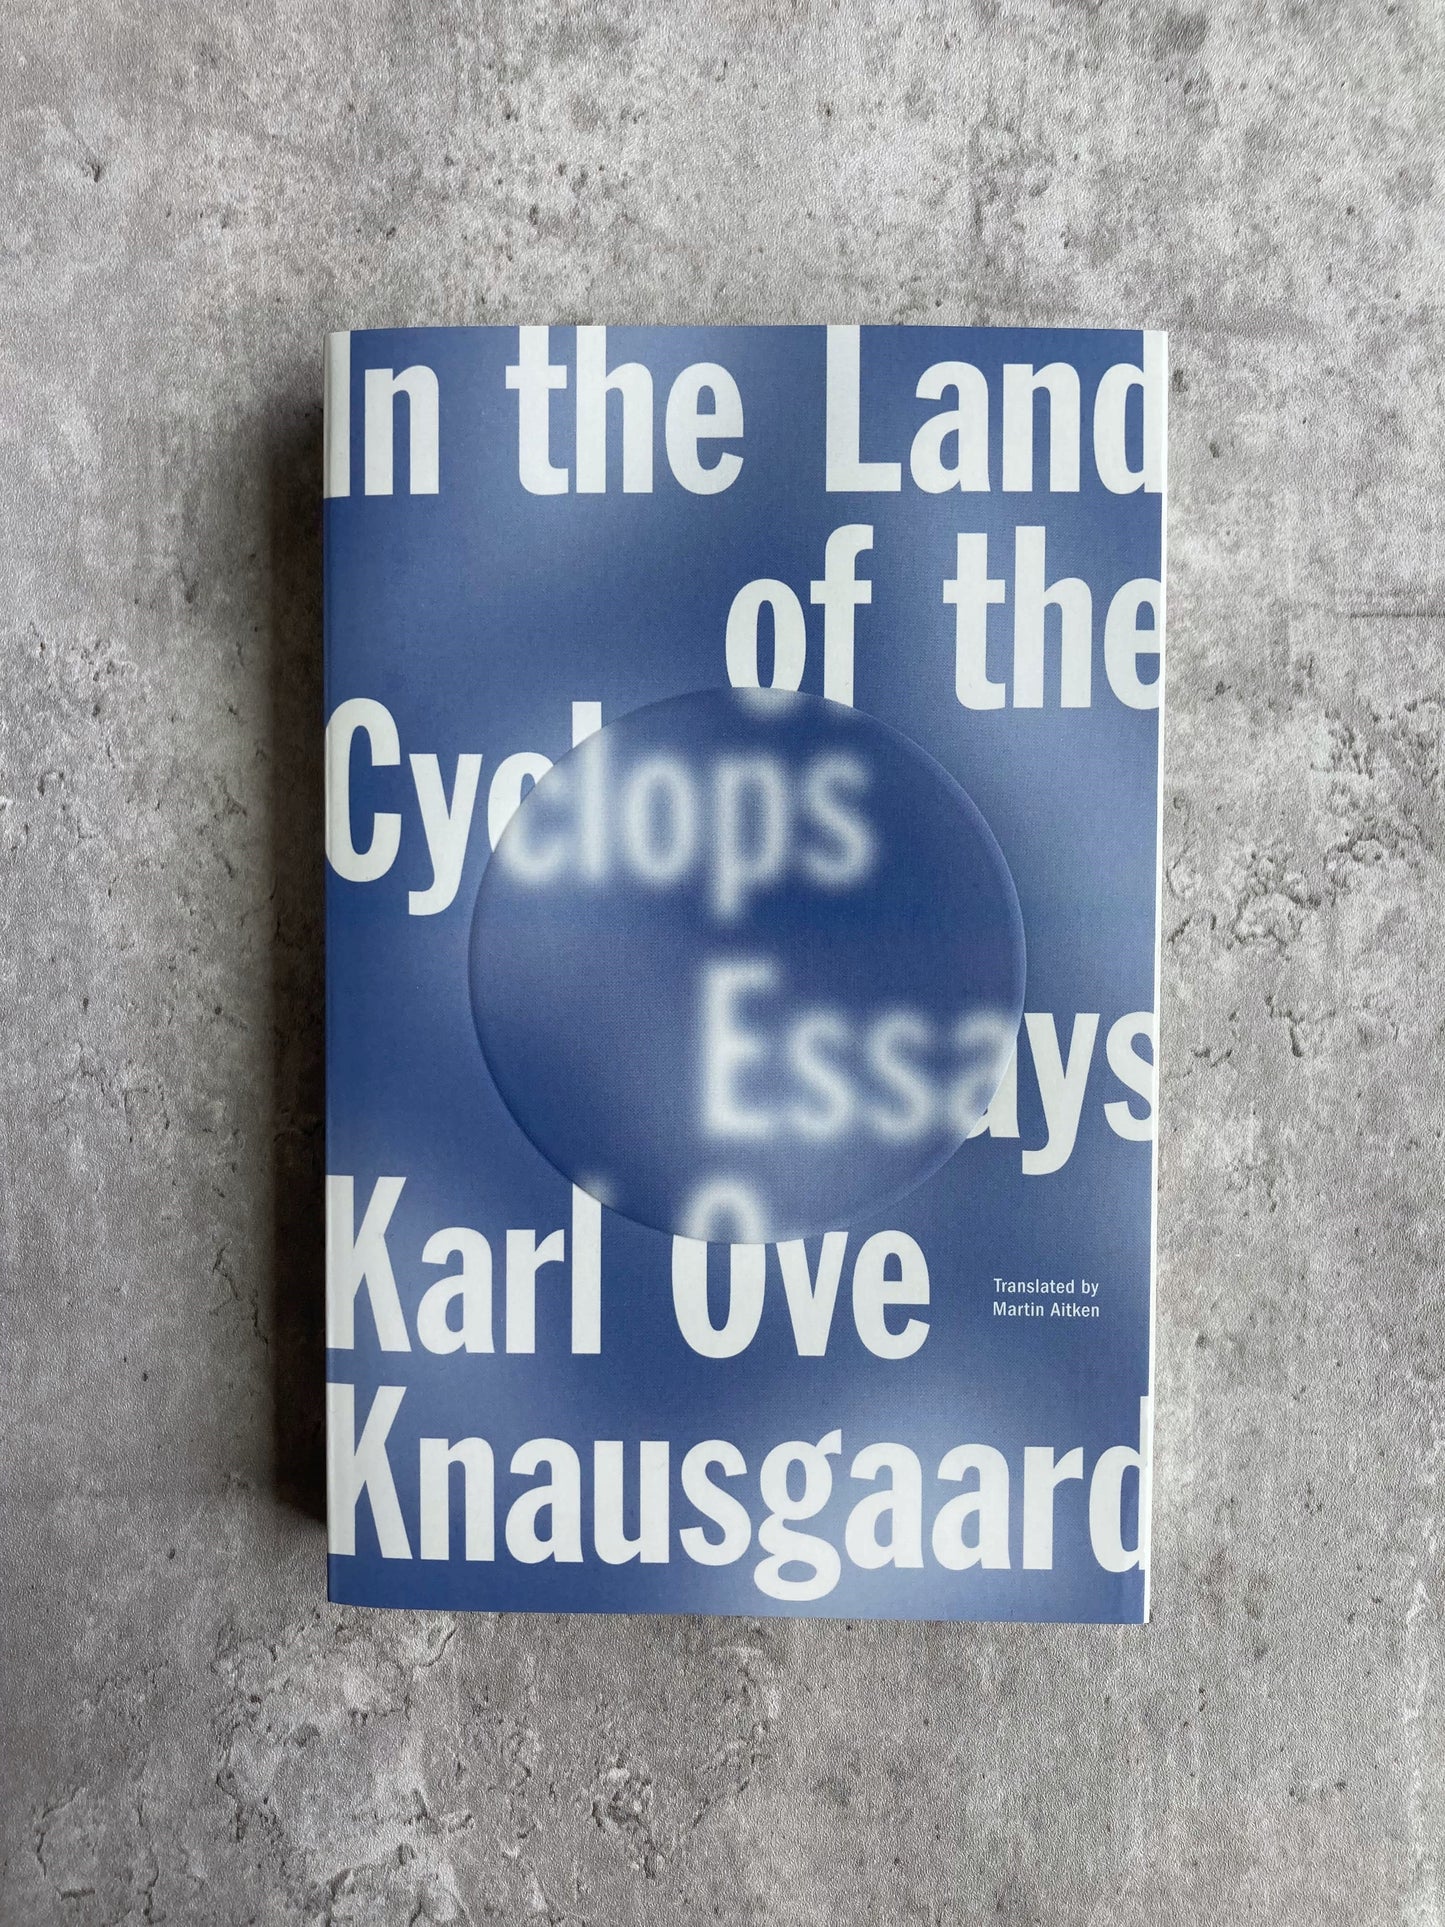 Cover of Karl Ove Knausgaard's In the Land of the Cyclops book. Shop all new and used books with The Stone Circle, the only online bookstore near you.